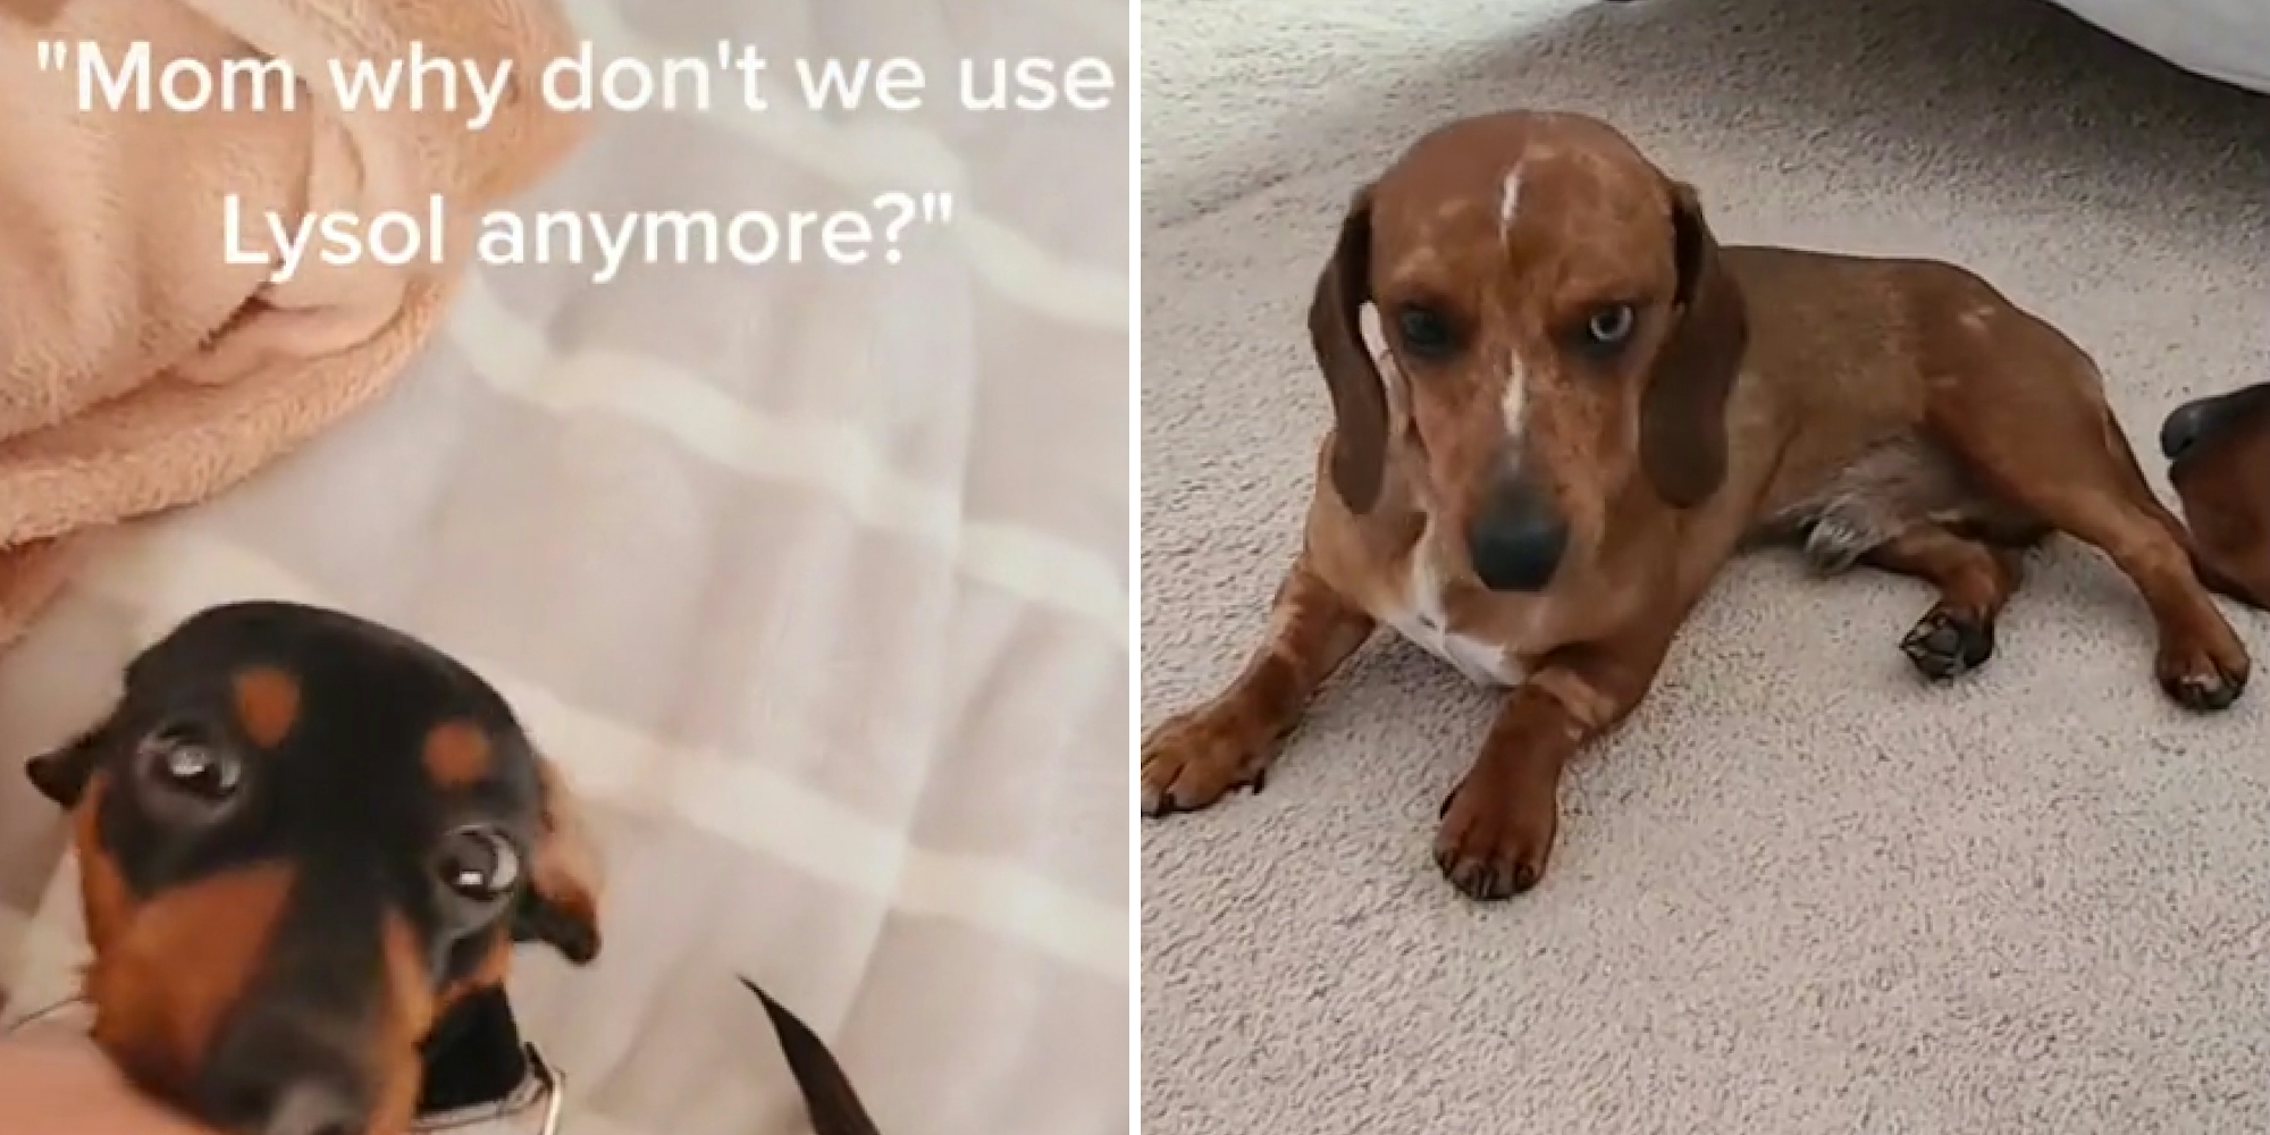 small dog being pet caption 'Mom why don't we use lysol anymore?' (l) Dog looking ill on carpet (r)